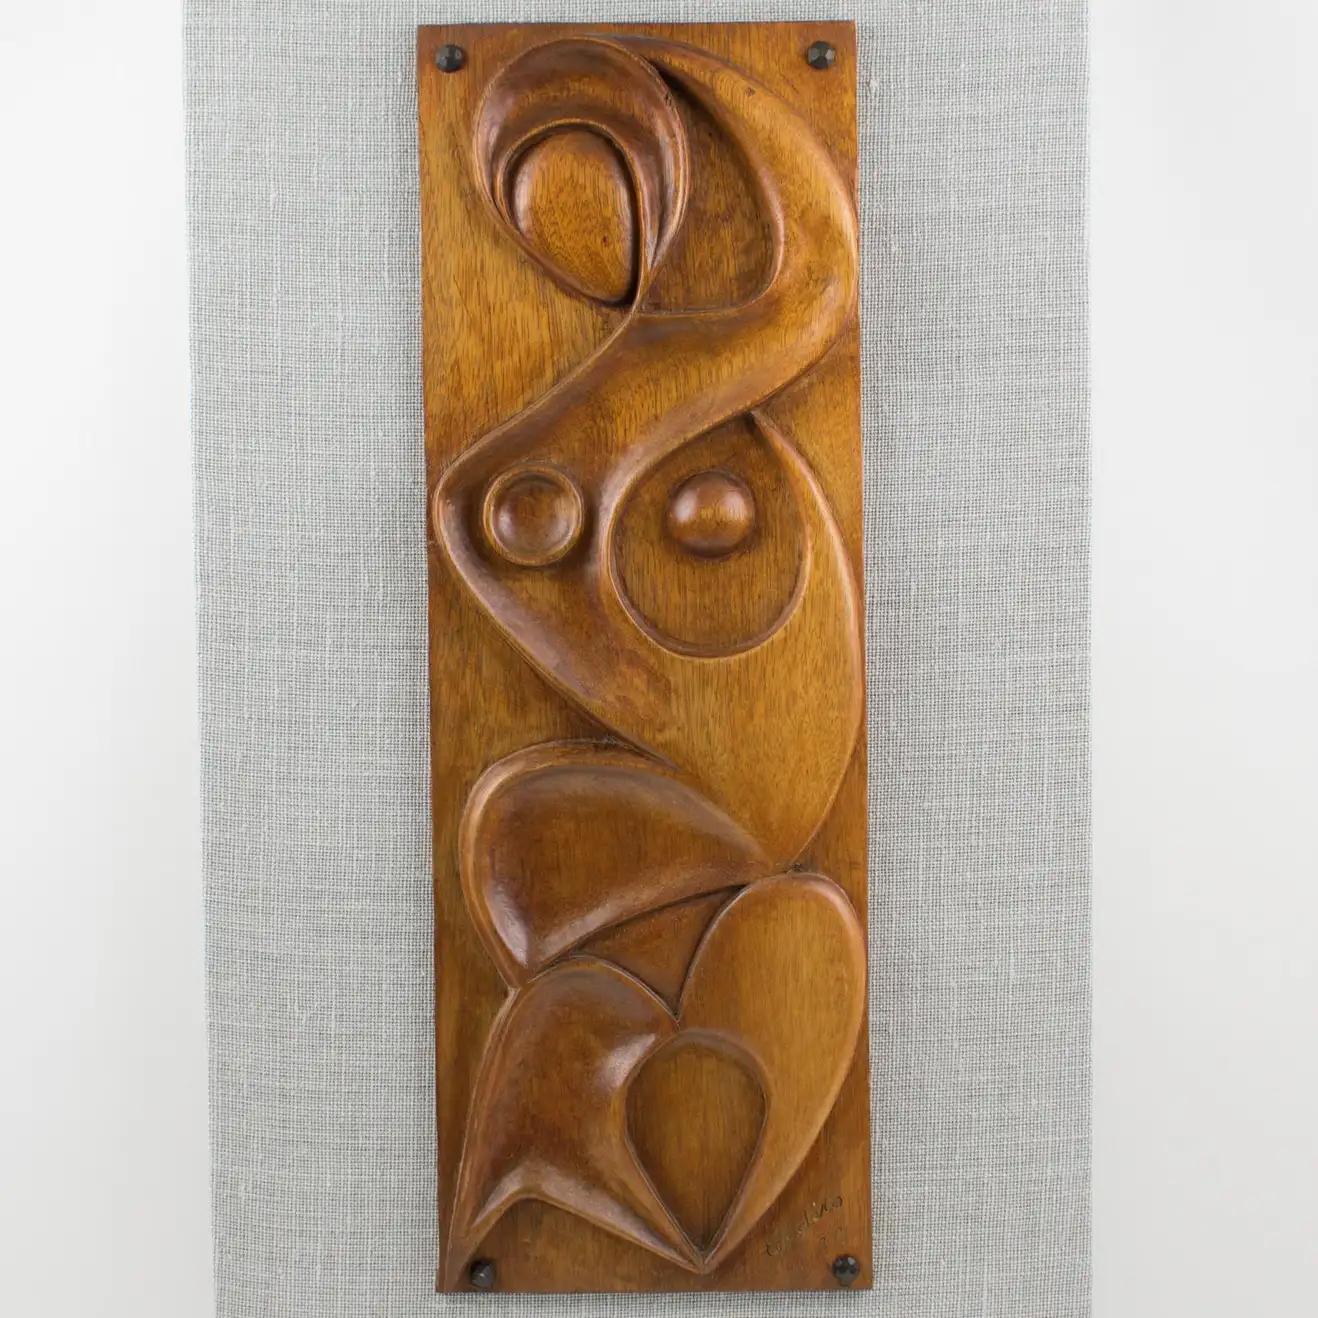 Late 20th Century Maxime Tendero Wall-Mounted Abstract Wooden Hand-Carved Art Sculpture Panel 1973 For Sale